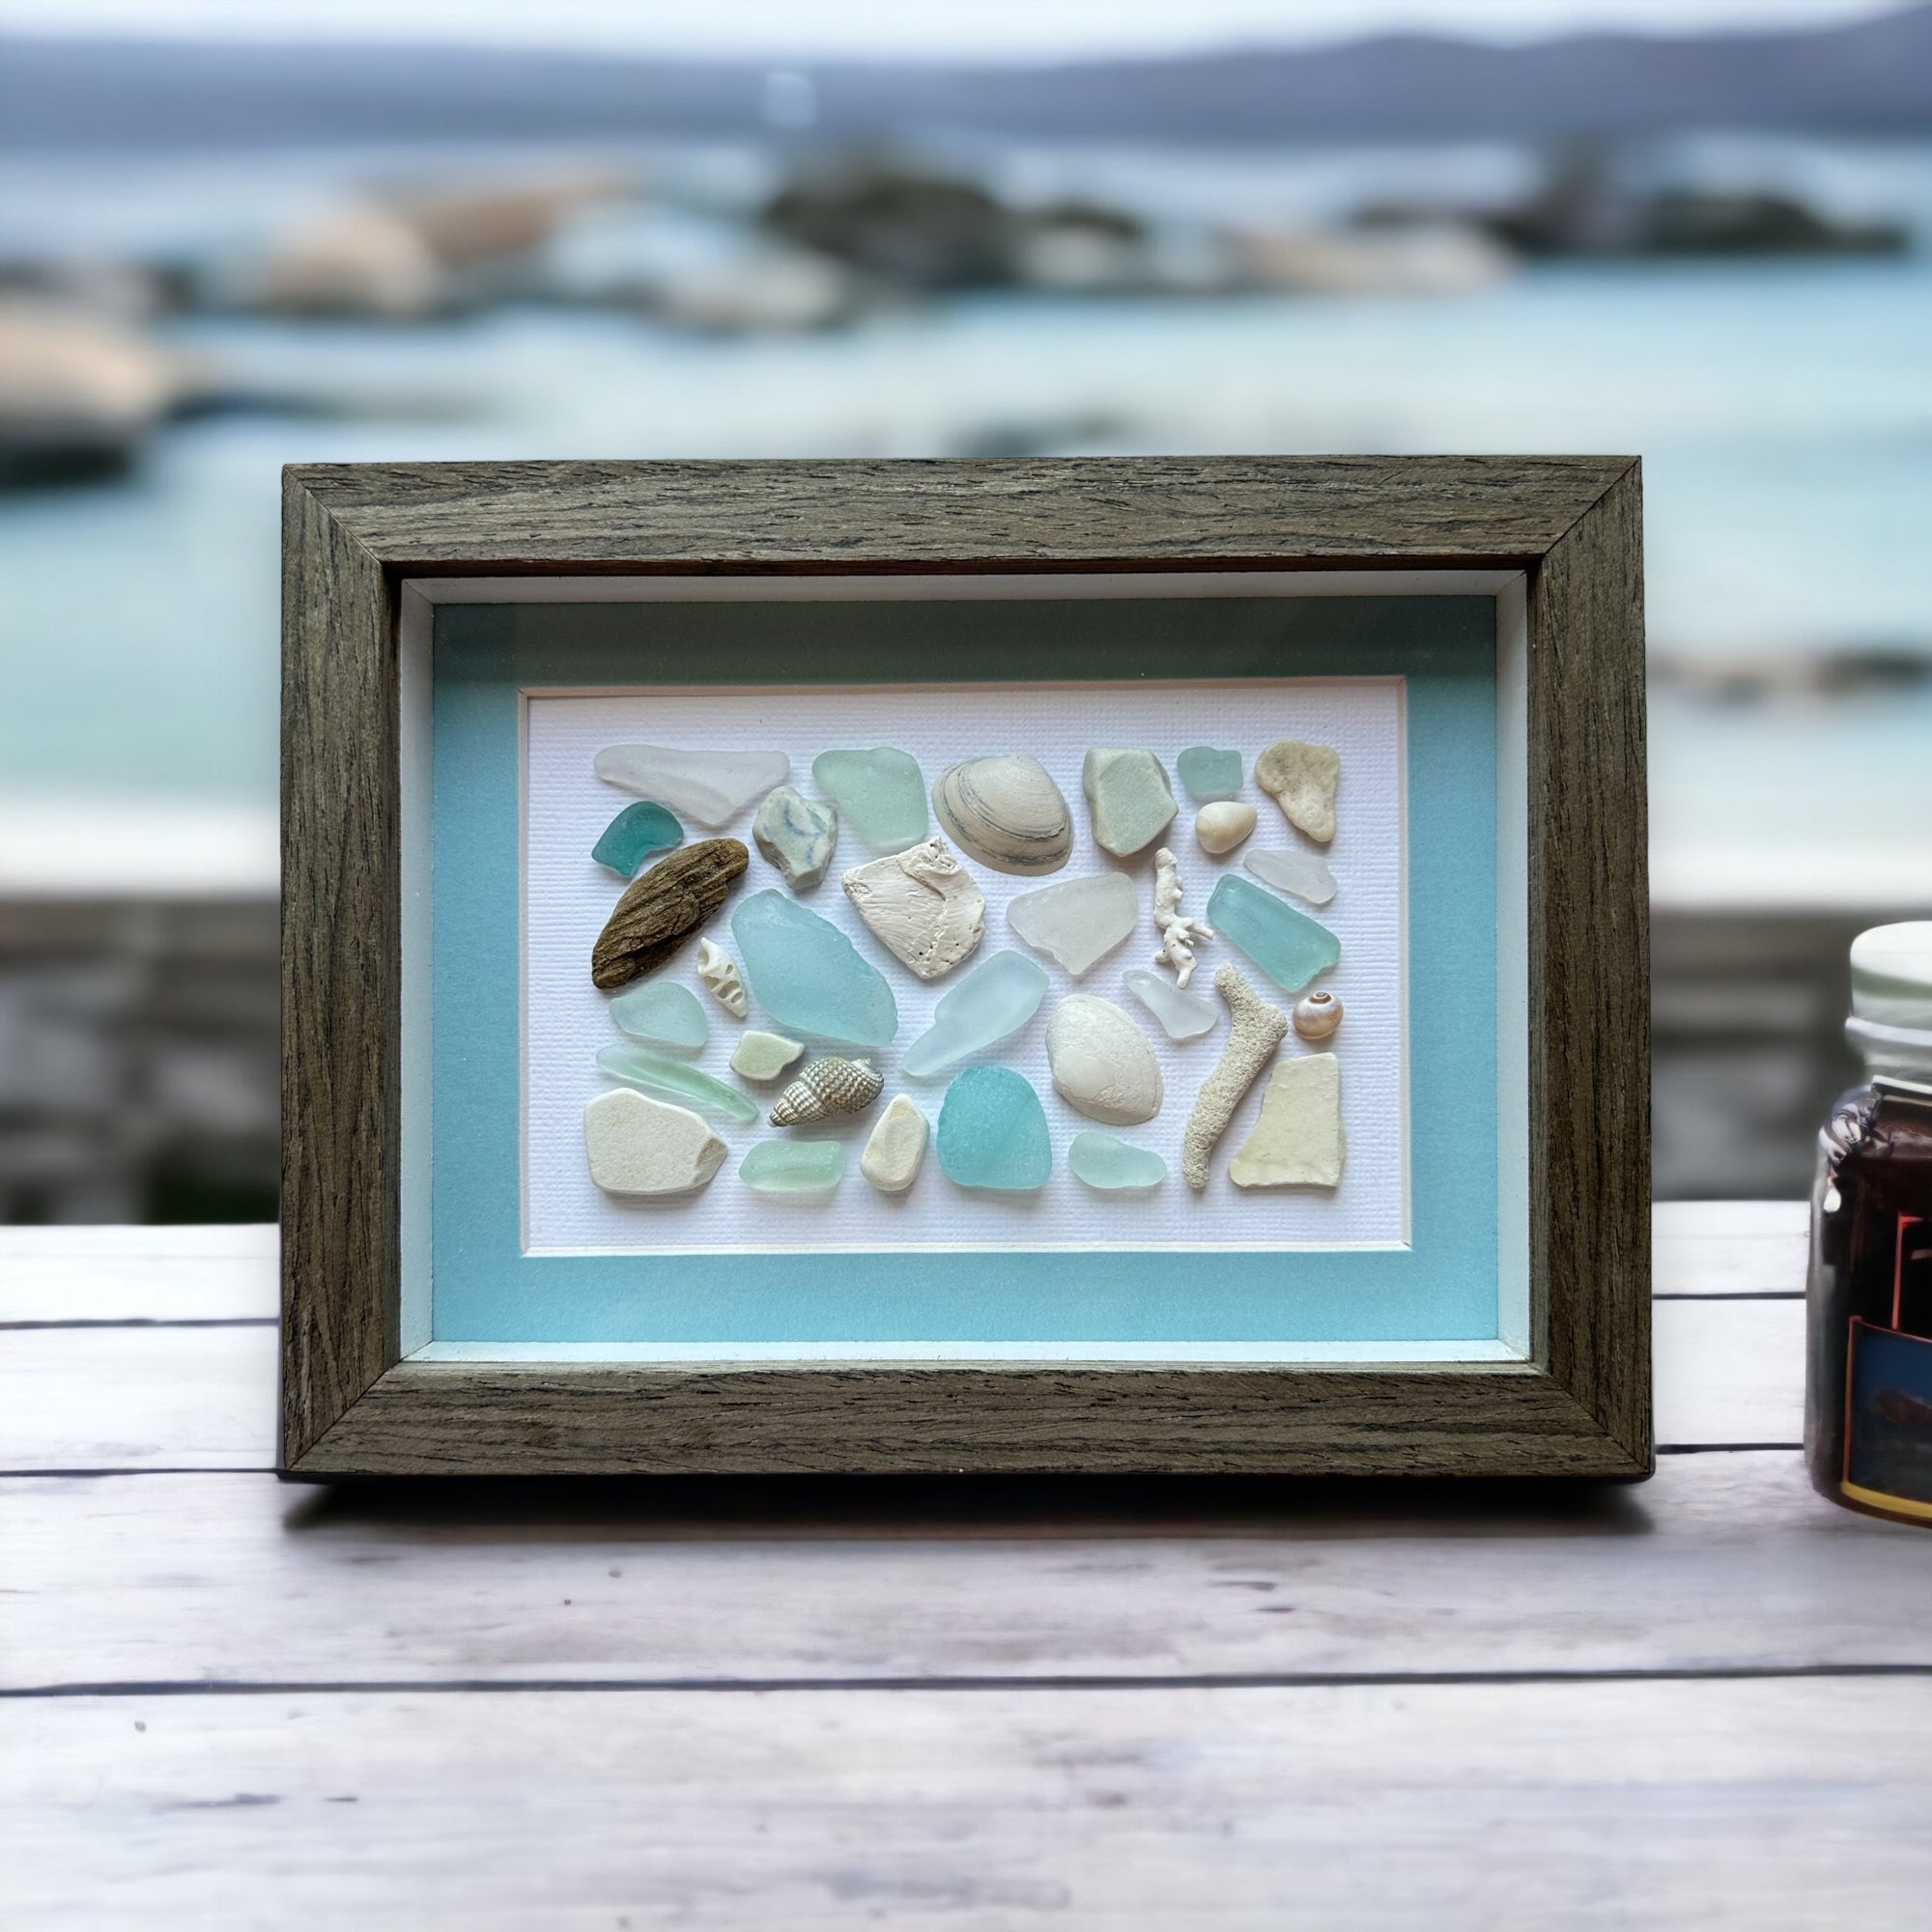 Sea Glass, Coral, Shells, Driftwood & Pottery Mosaic Picture Mixed Media Art